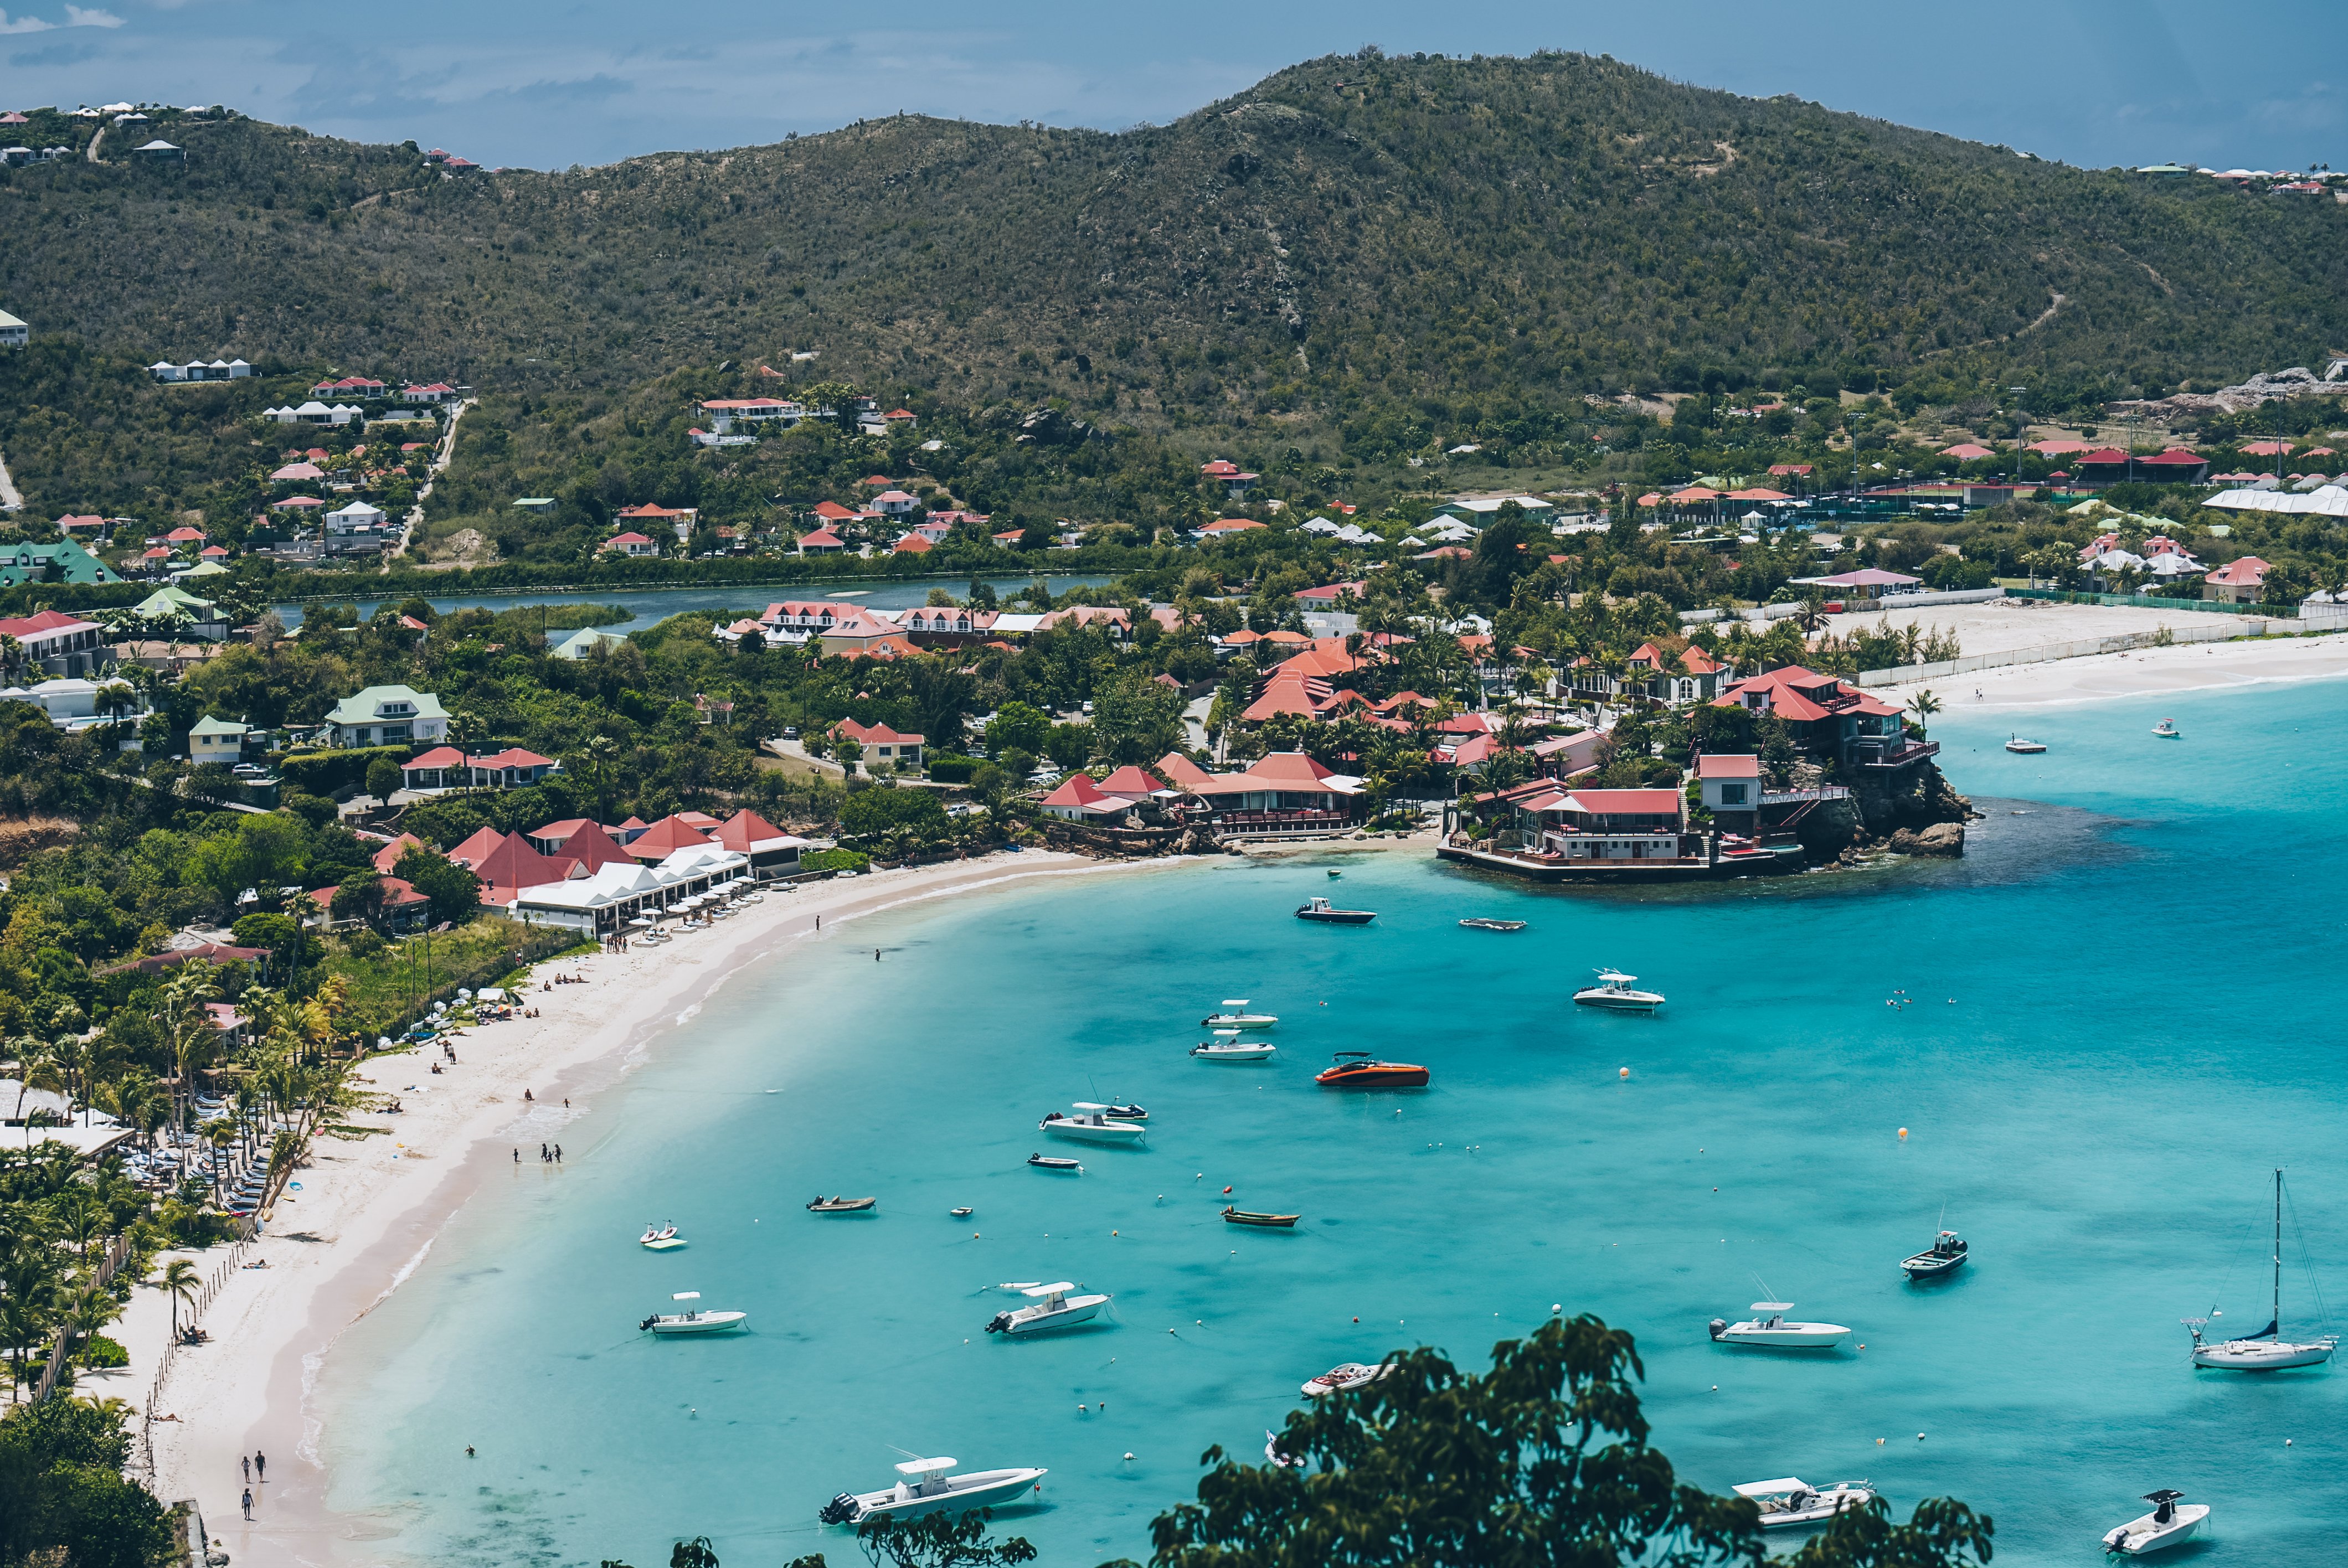 Elevated view over pretty red rooftops of town and sea, Gustavia, St.  Barthelemy (St. Barts) (St.